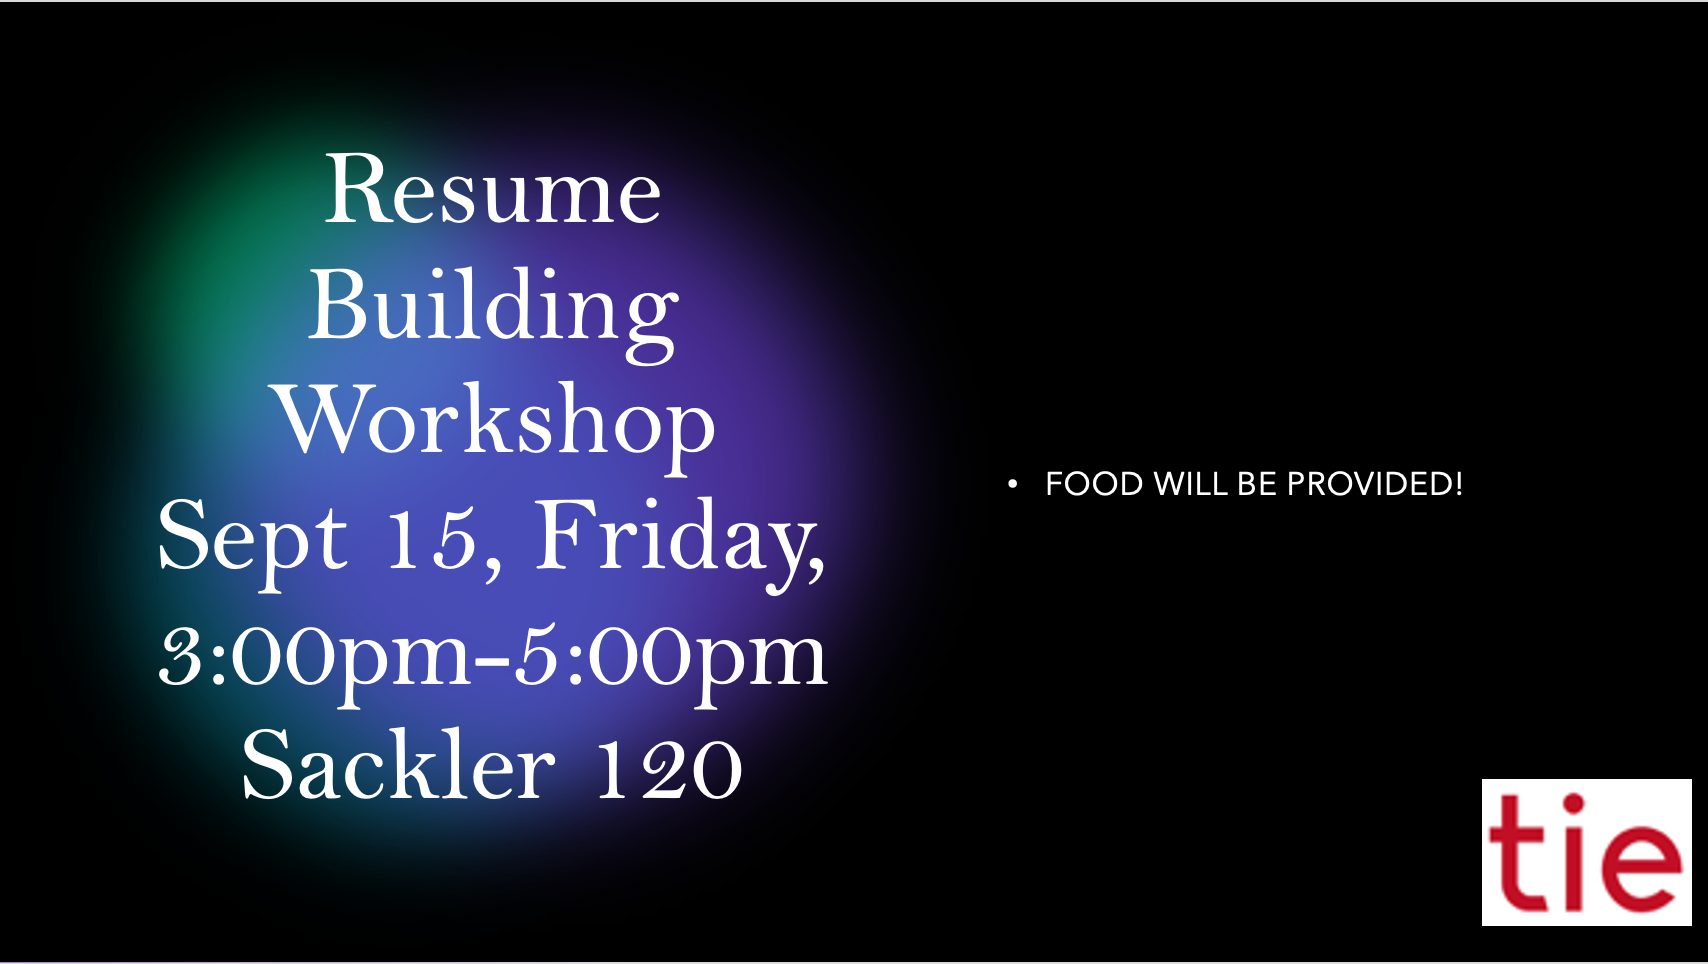 Flyer for TIE's Resume Building Workshop on 09/15 from 3 PM to 5 PM in Sackler 120